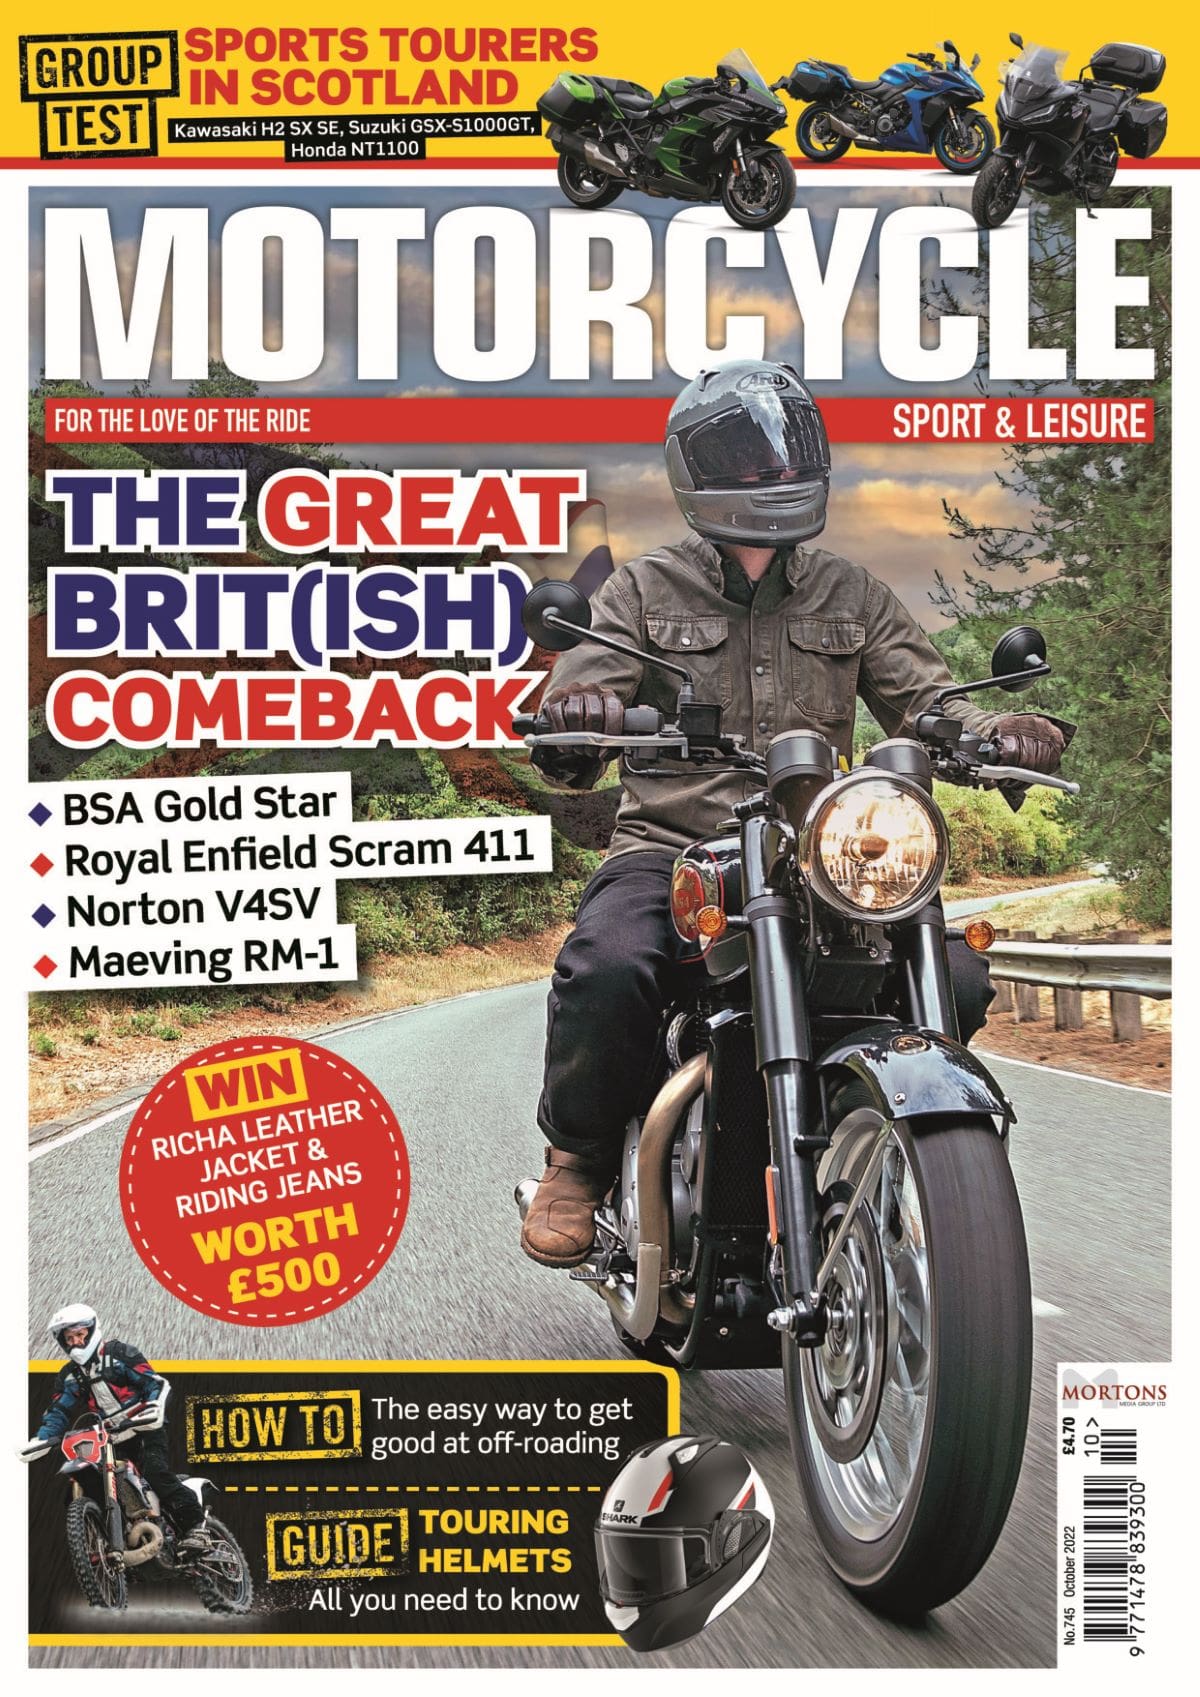 October issue of Motorcycle Sport & Leisure out now!